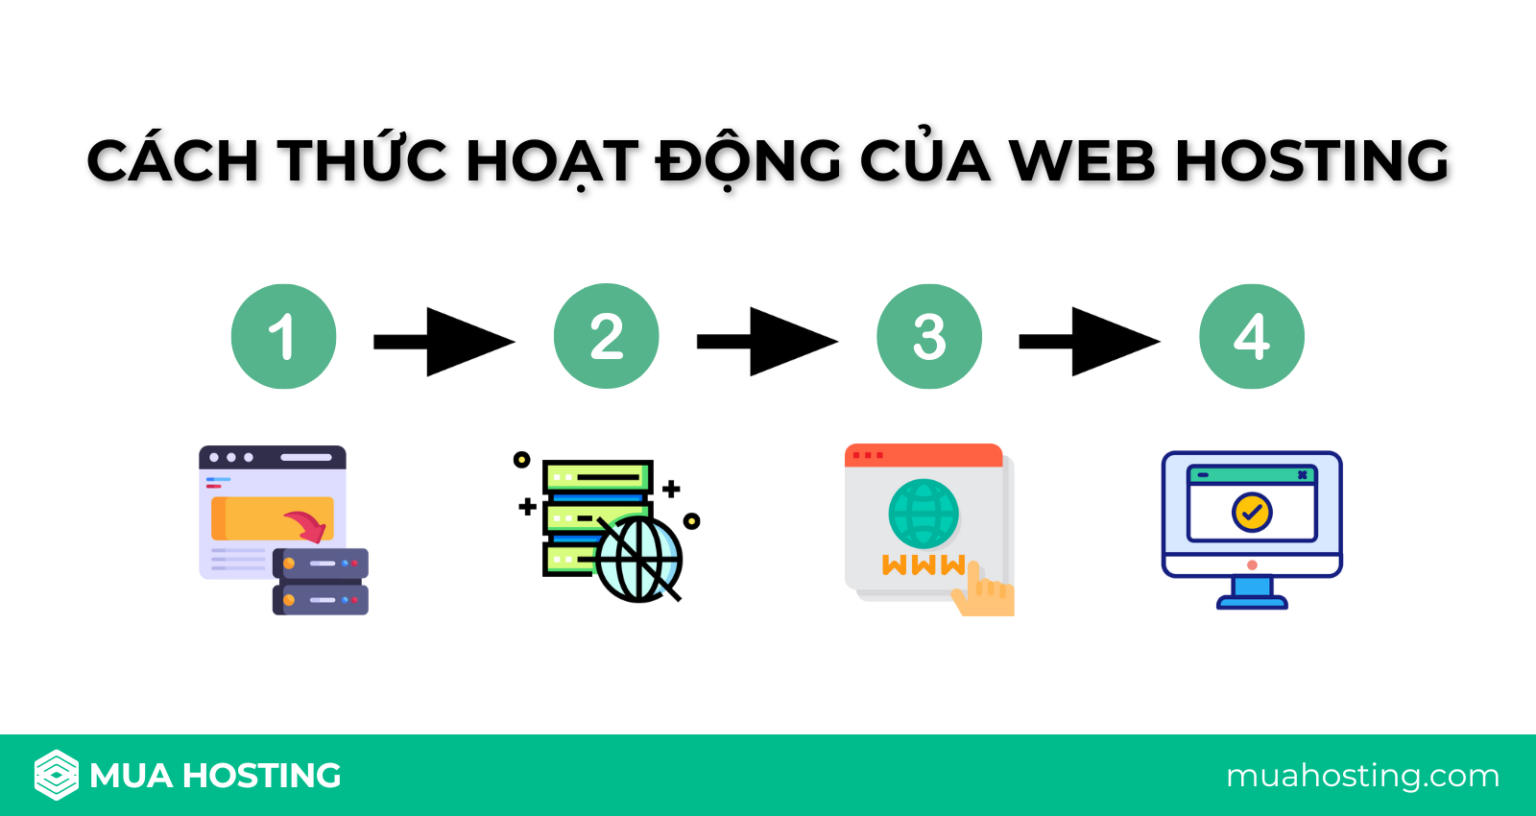 cach-thuc-hoat-dong-web-hosting (1).png